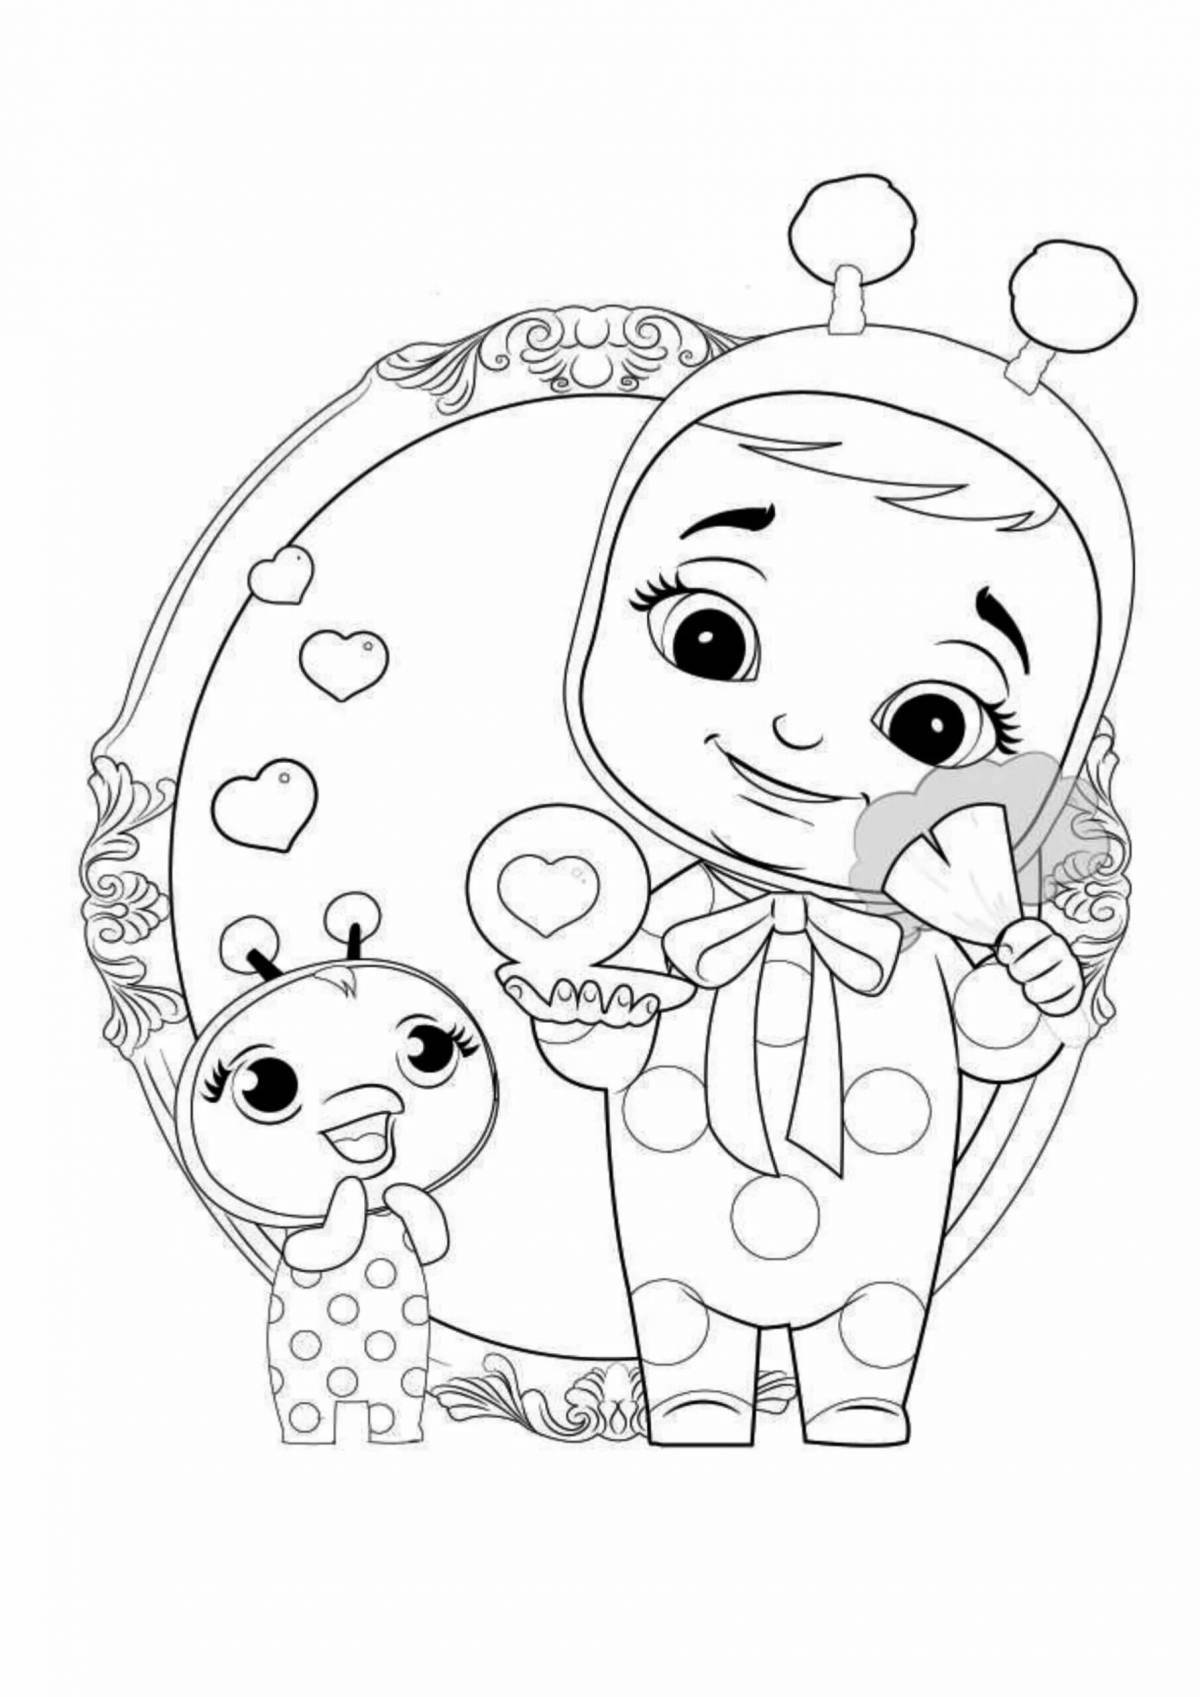 Cute edge baby coloring page